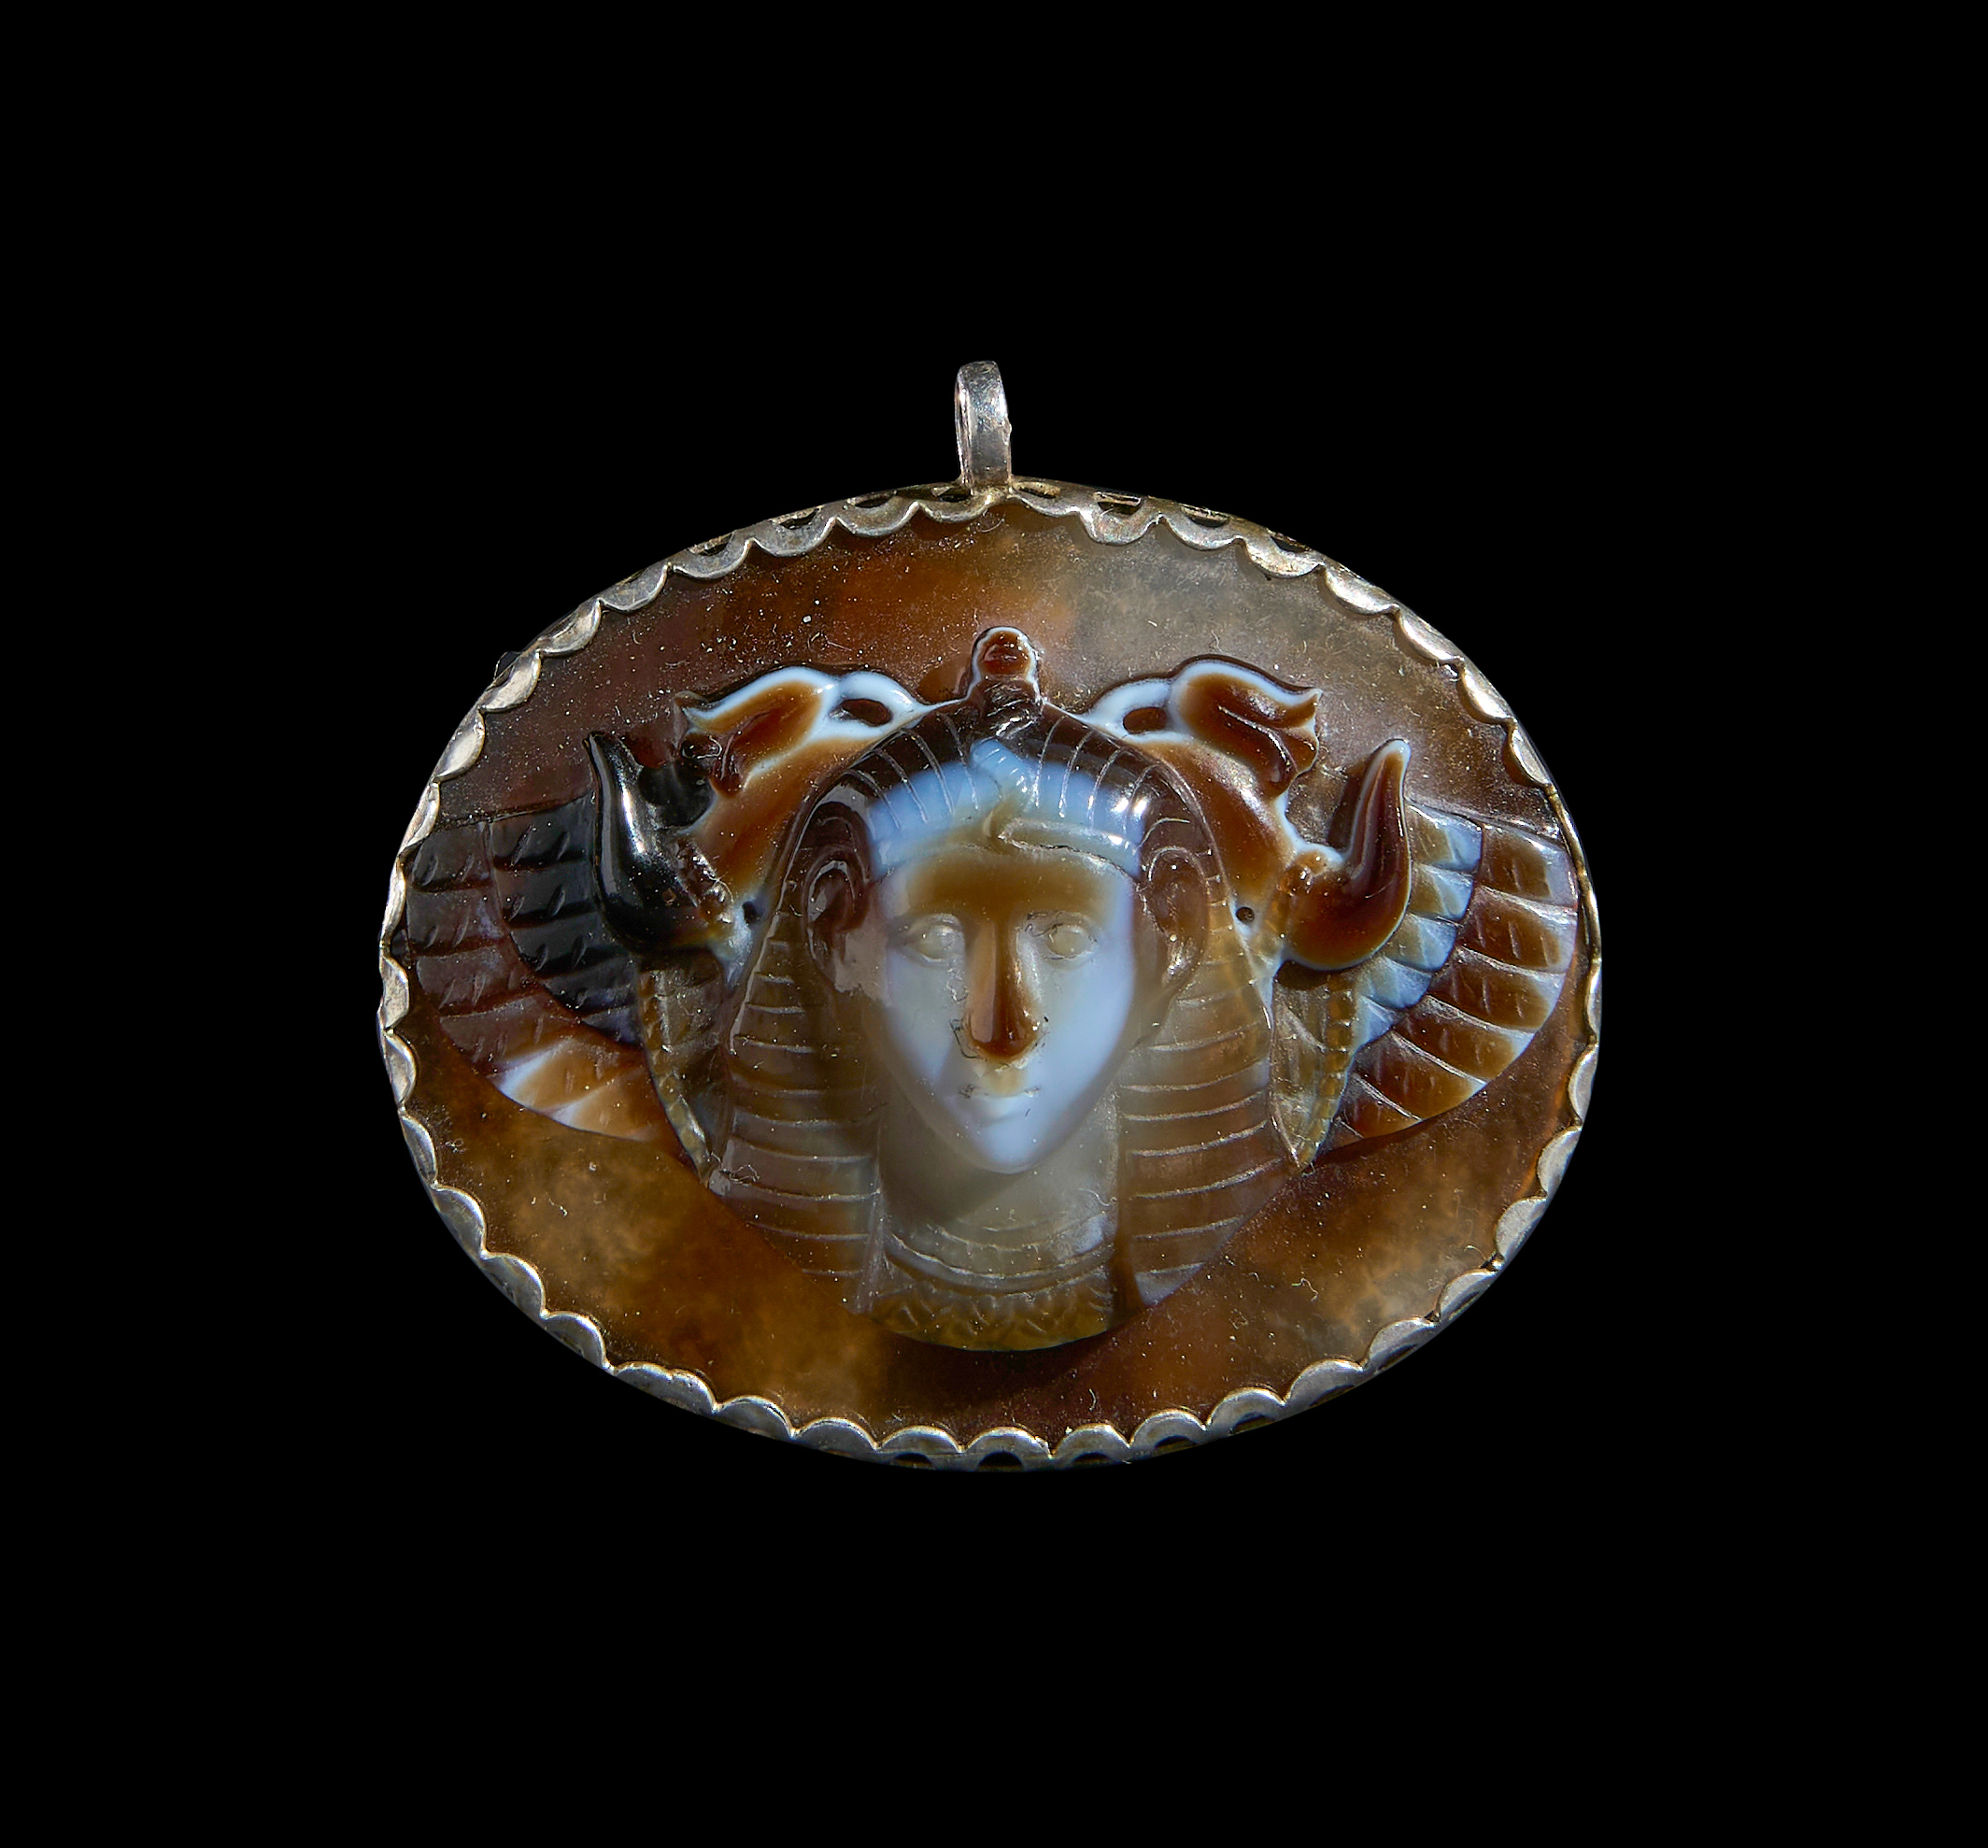 A GRAECO-EGYPTIAN AGATE AMULET OF A PHARAOH, POSSIBLY ANCIENT